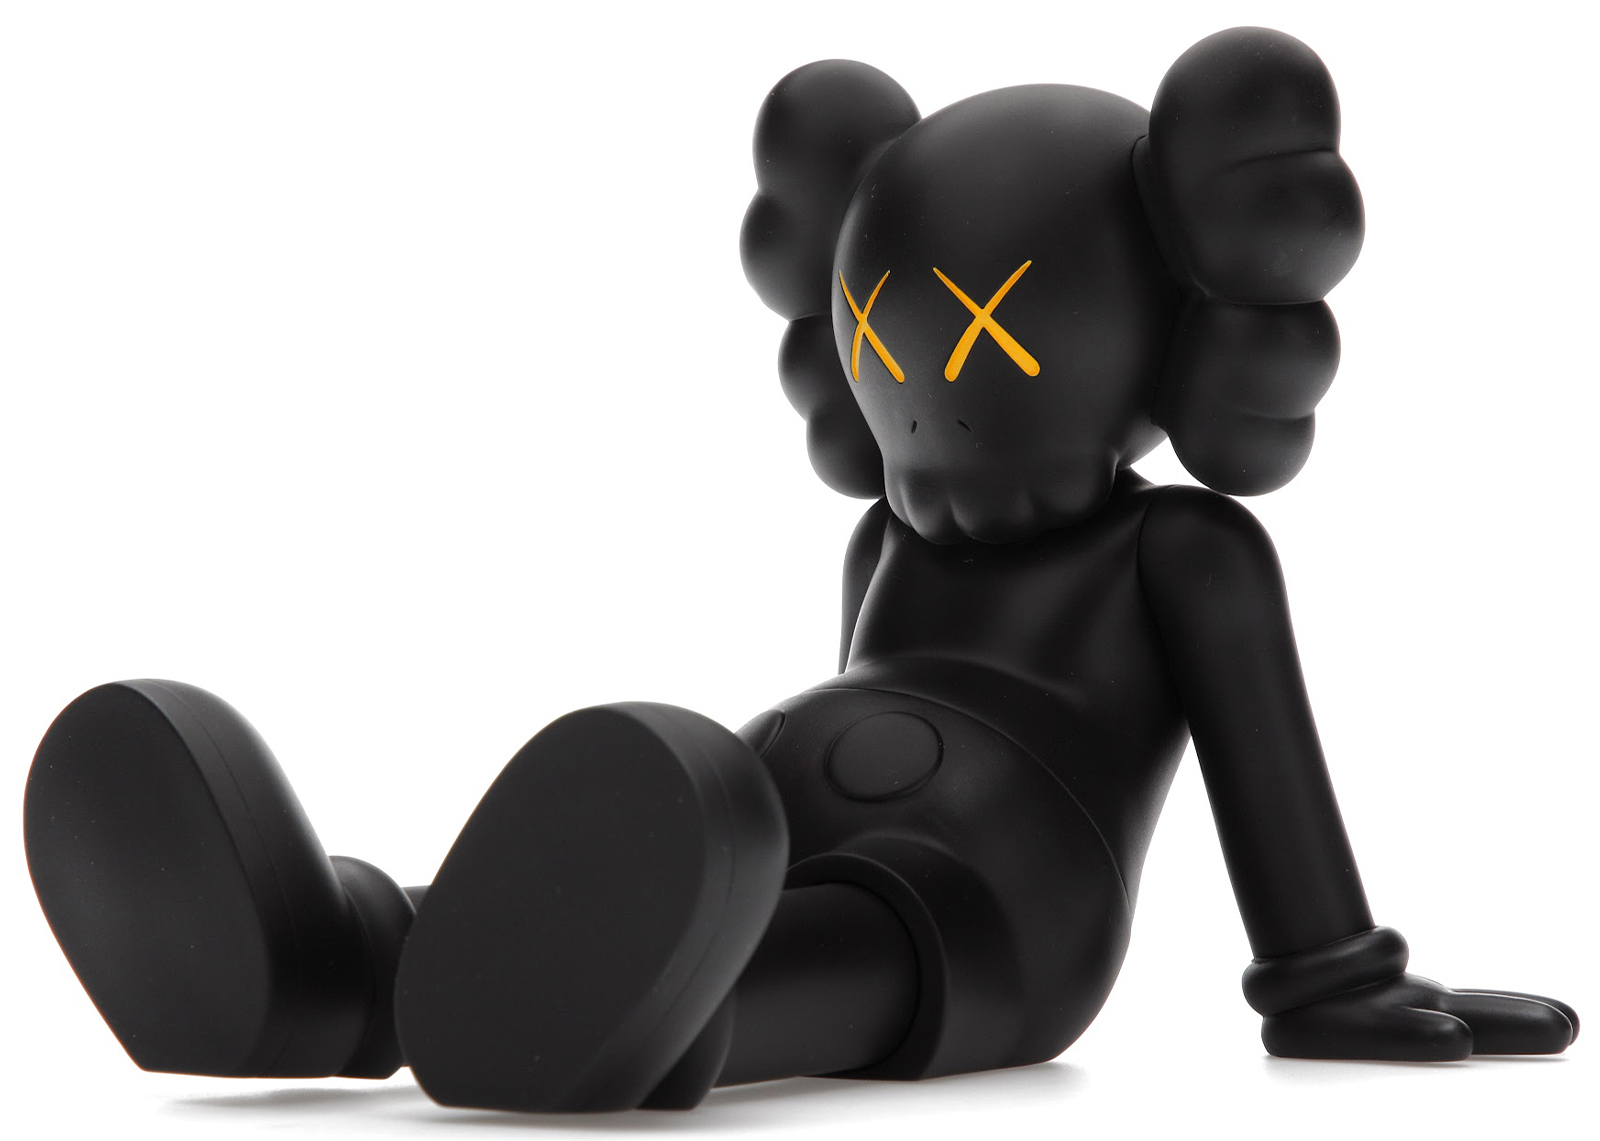 images.stockx.com/images/Kaws-Holiday-Limited-7-Vi